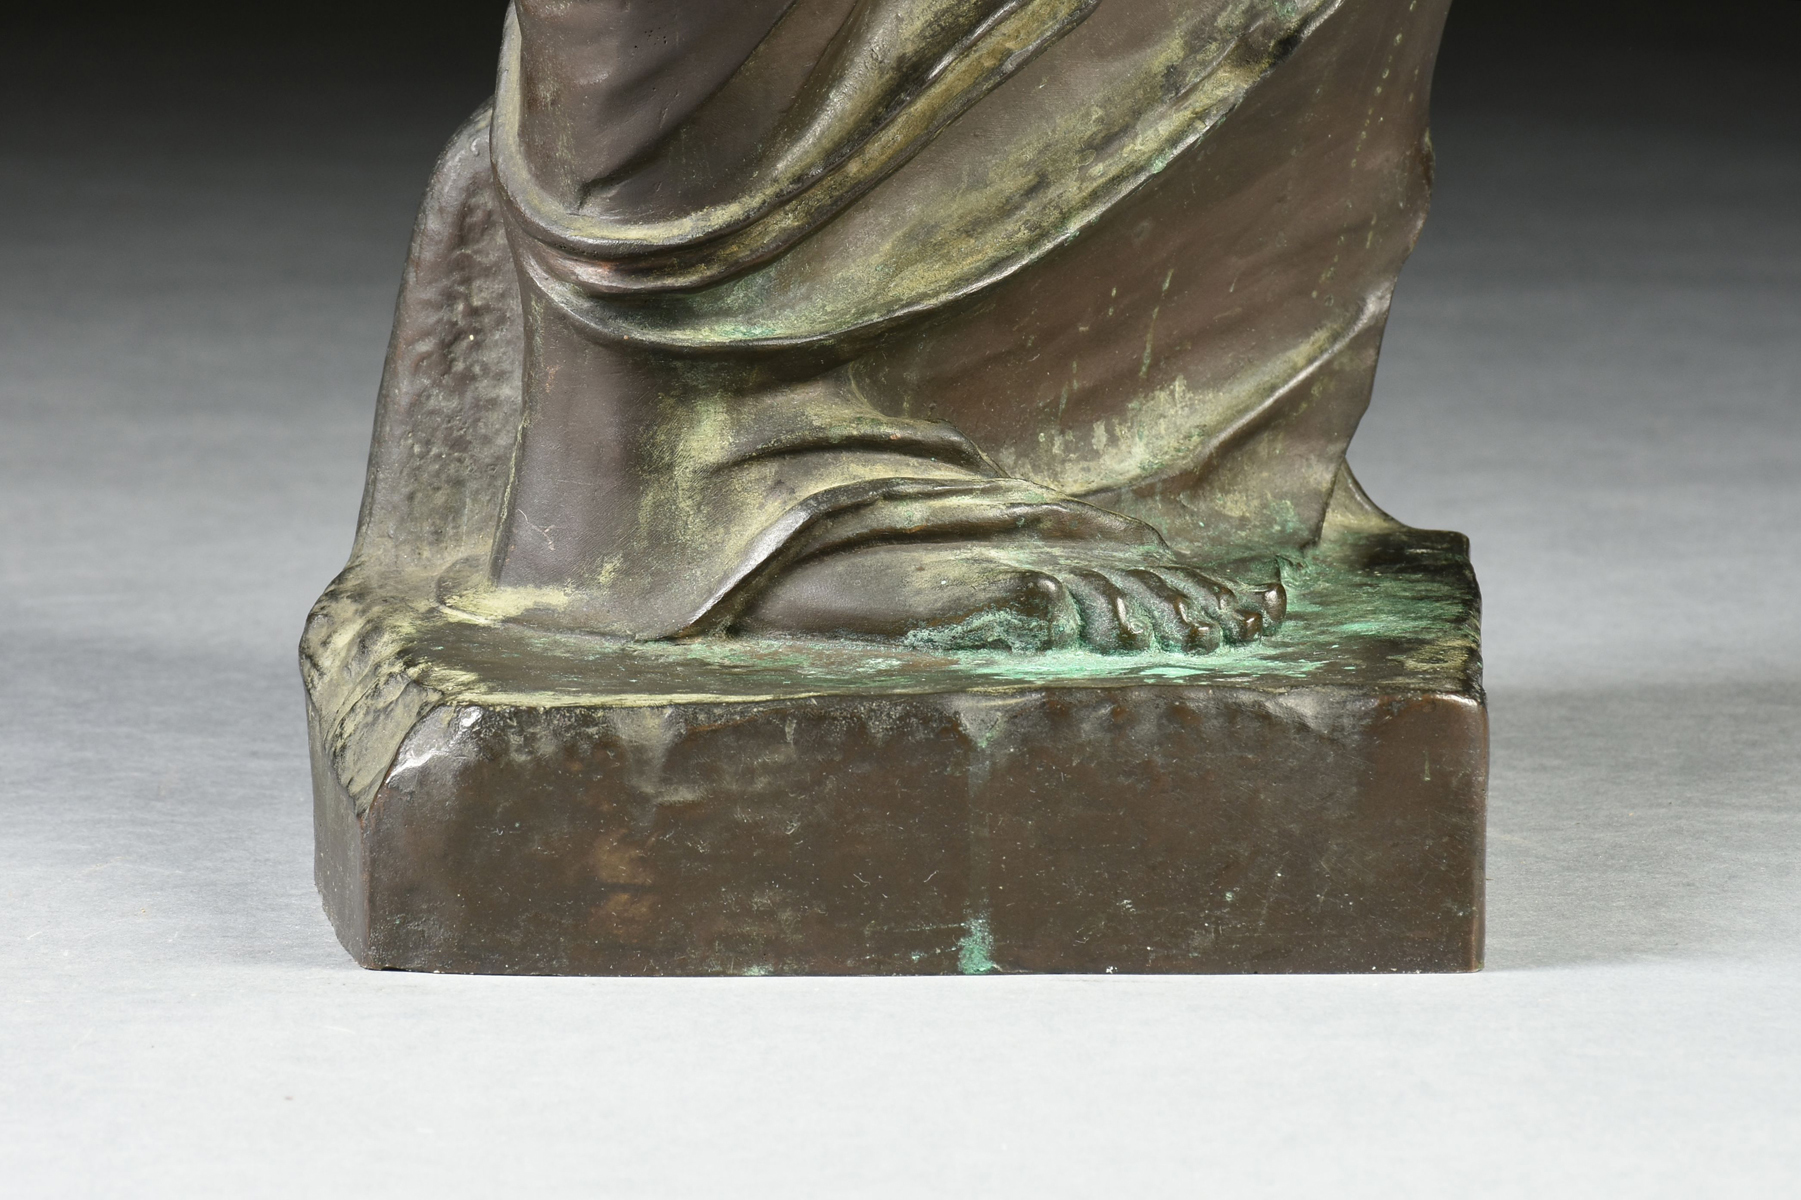 A FRENCH BRONZE VENUS DE MILO, AFTER THE ANTIQUE, BY THE RICHARD, ECK & DURAND FOUNDRY, 1838-1844, a - Image 7 of 13